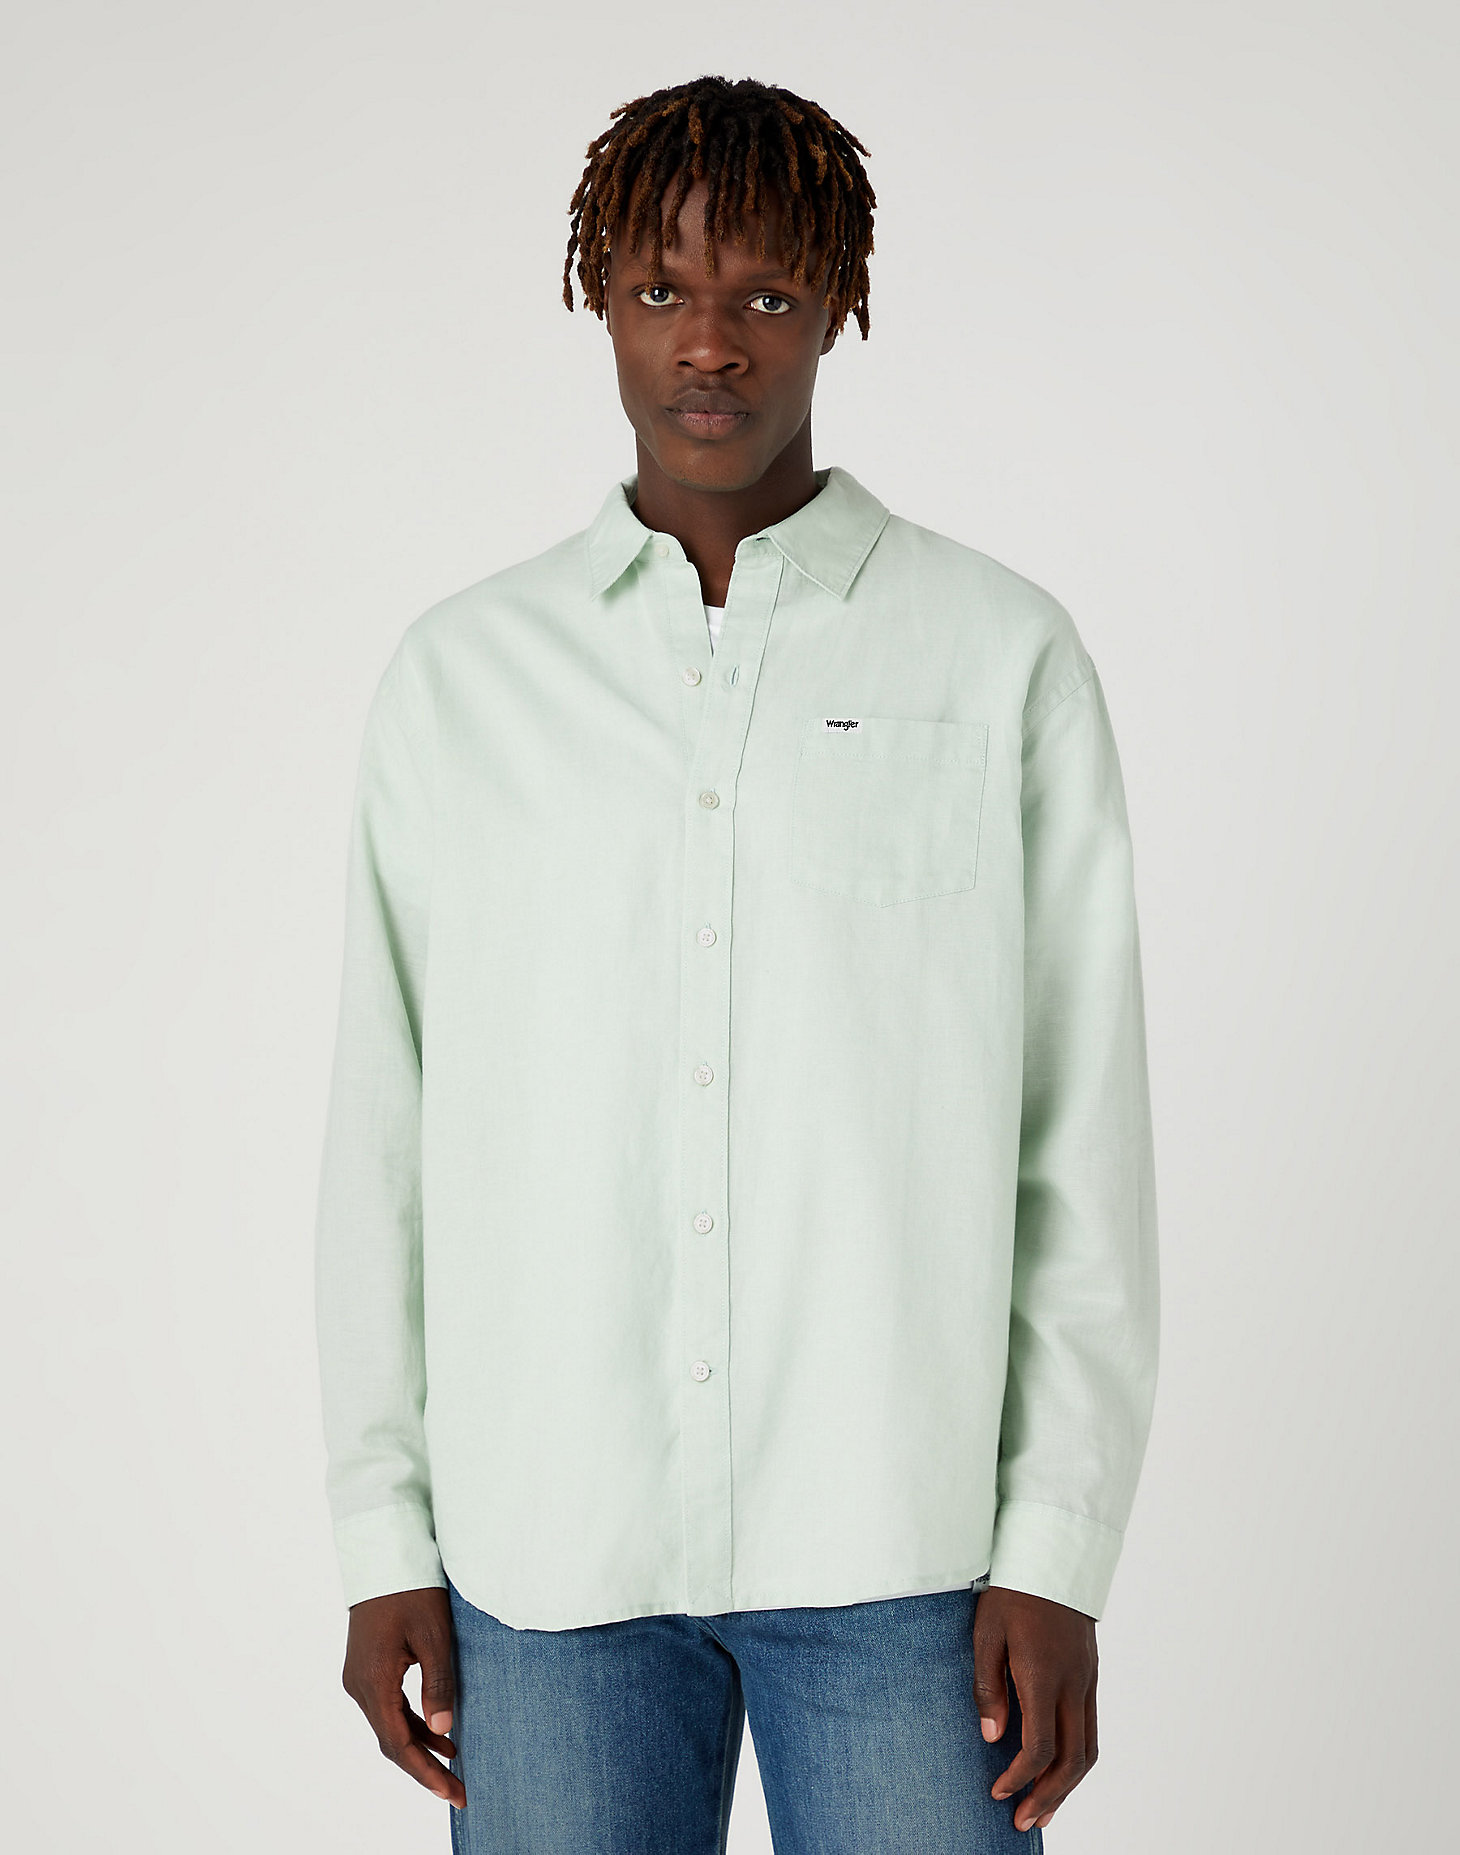 Long Sleeve One Pocket Shirt in Surf Spray main view